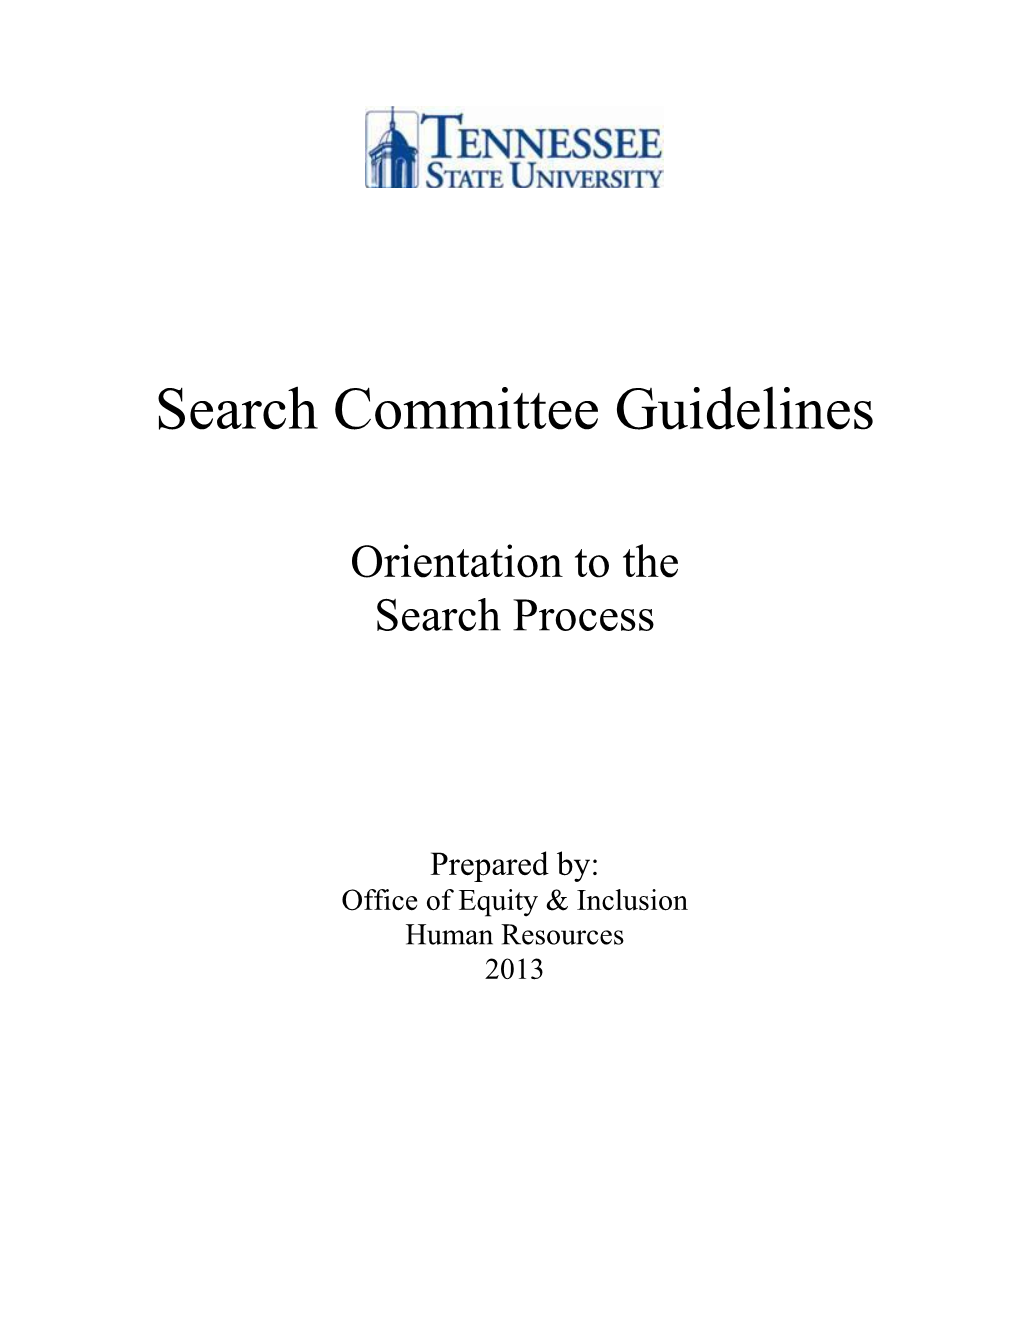 Search Committee Chair Guideline